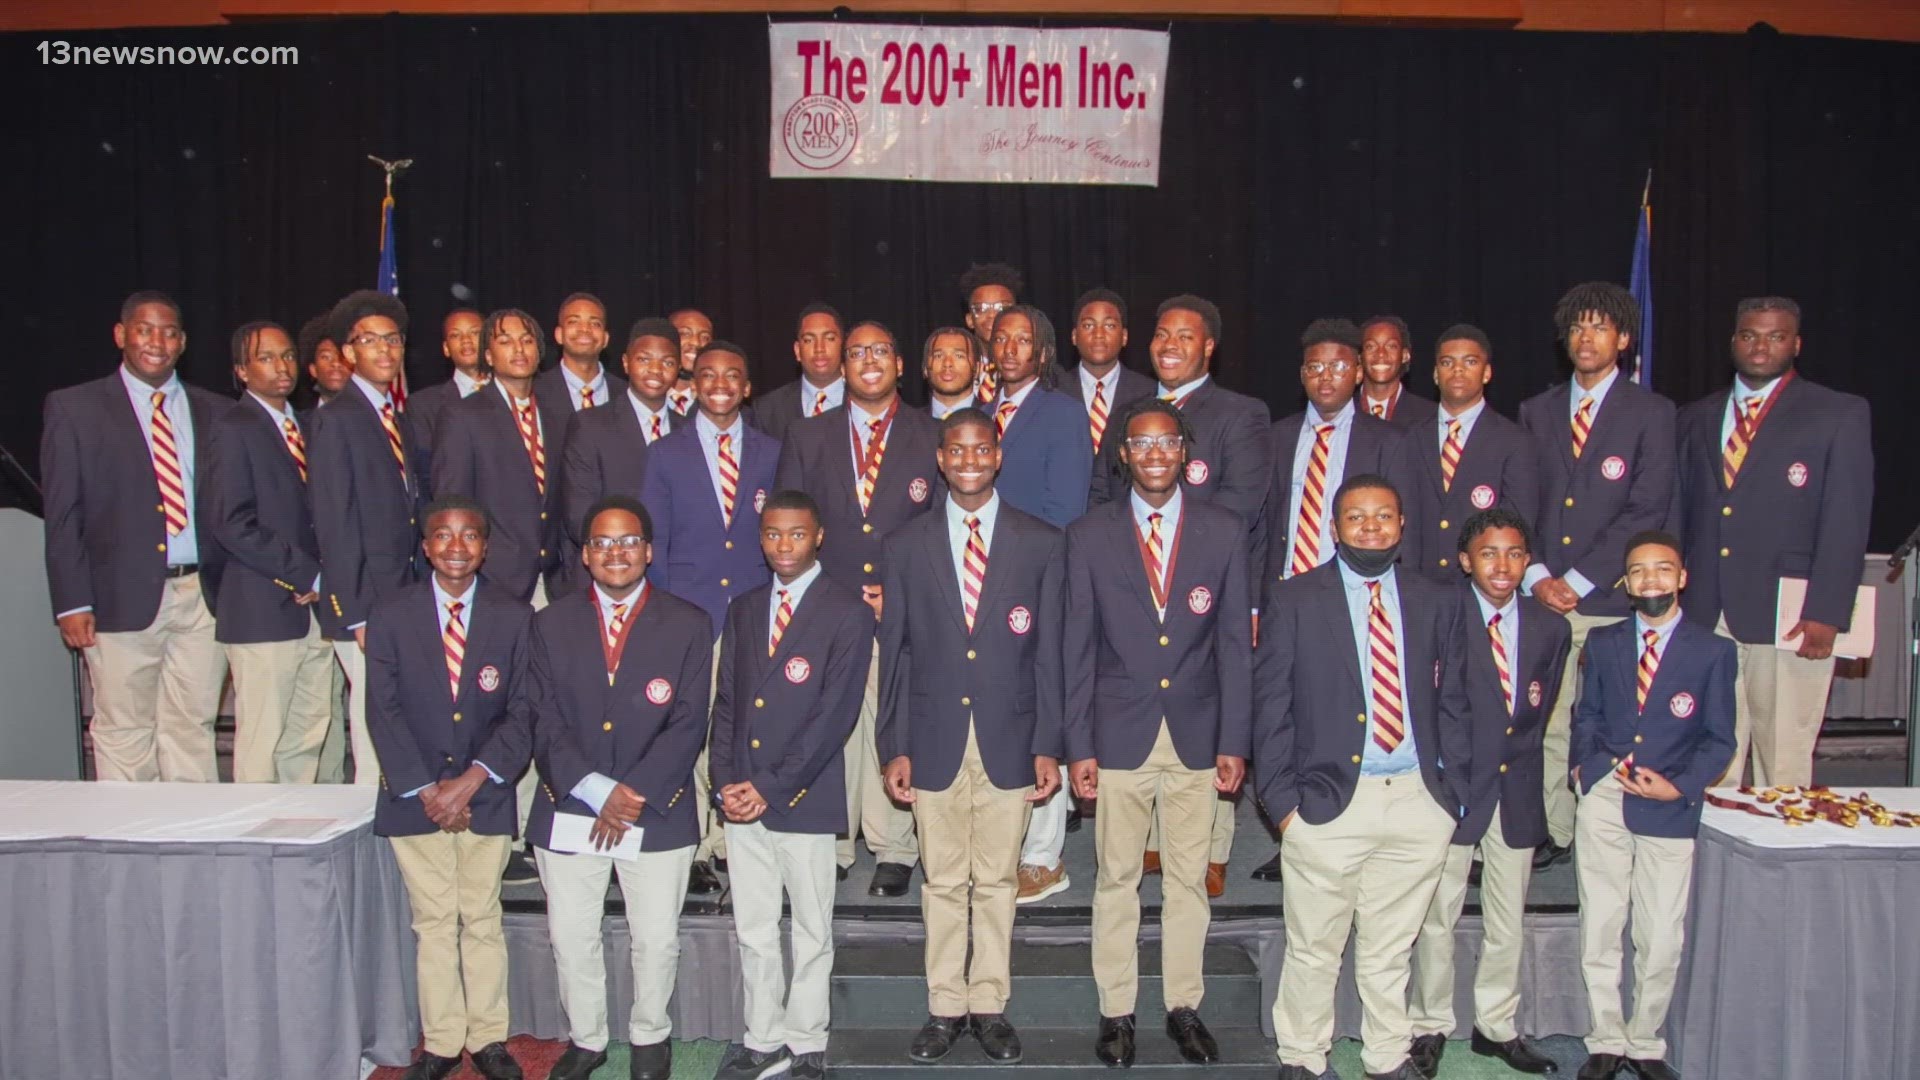 The 200+ Men Foundation is the nonprofit arm of 200+ Men, Inc. The group's programs aim to support Black boys and young men through school, career and life.